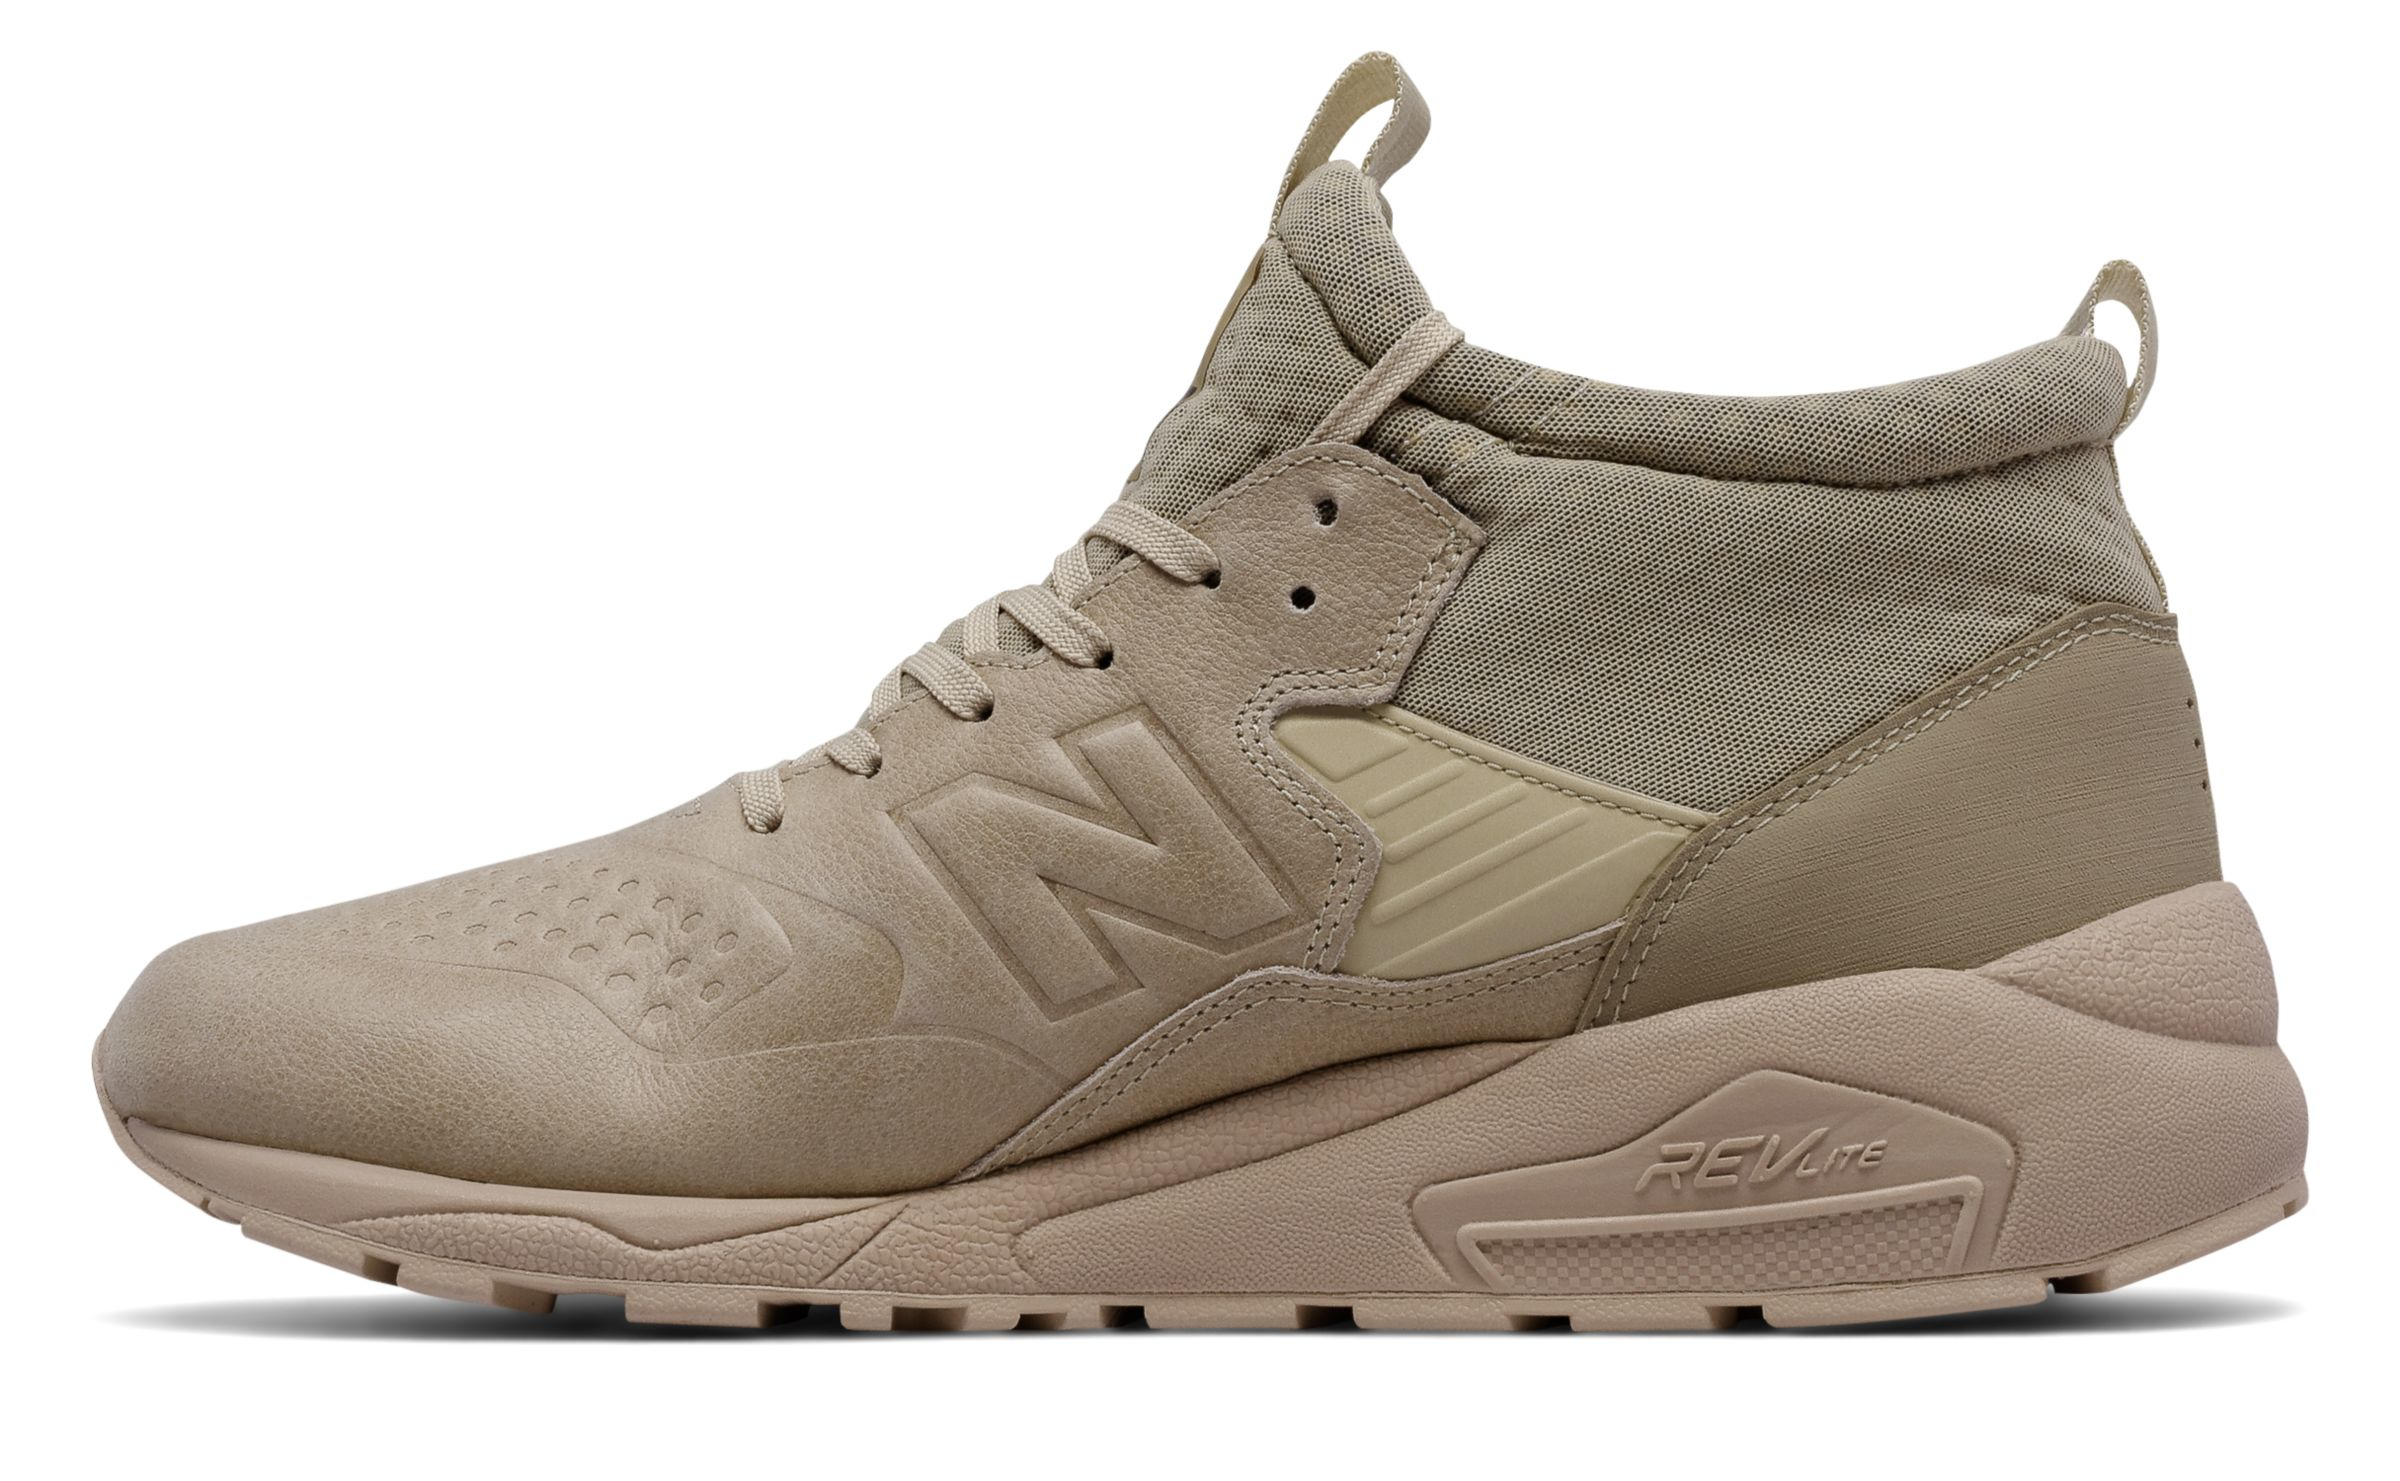 New Balance Leather 580 Deconstructed Mid 580 Deconstructed Mid in Beige  (Natural) for Men - Lyst